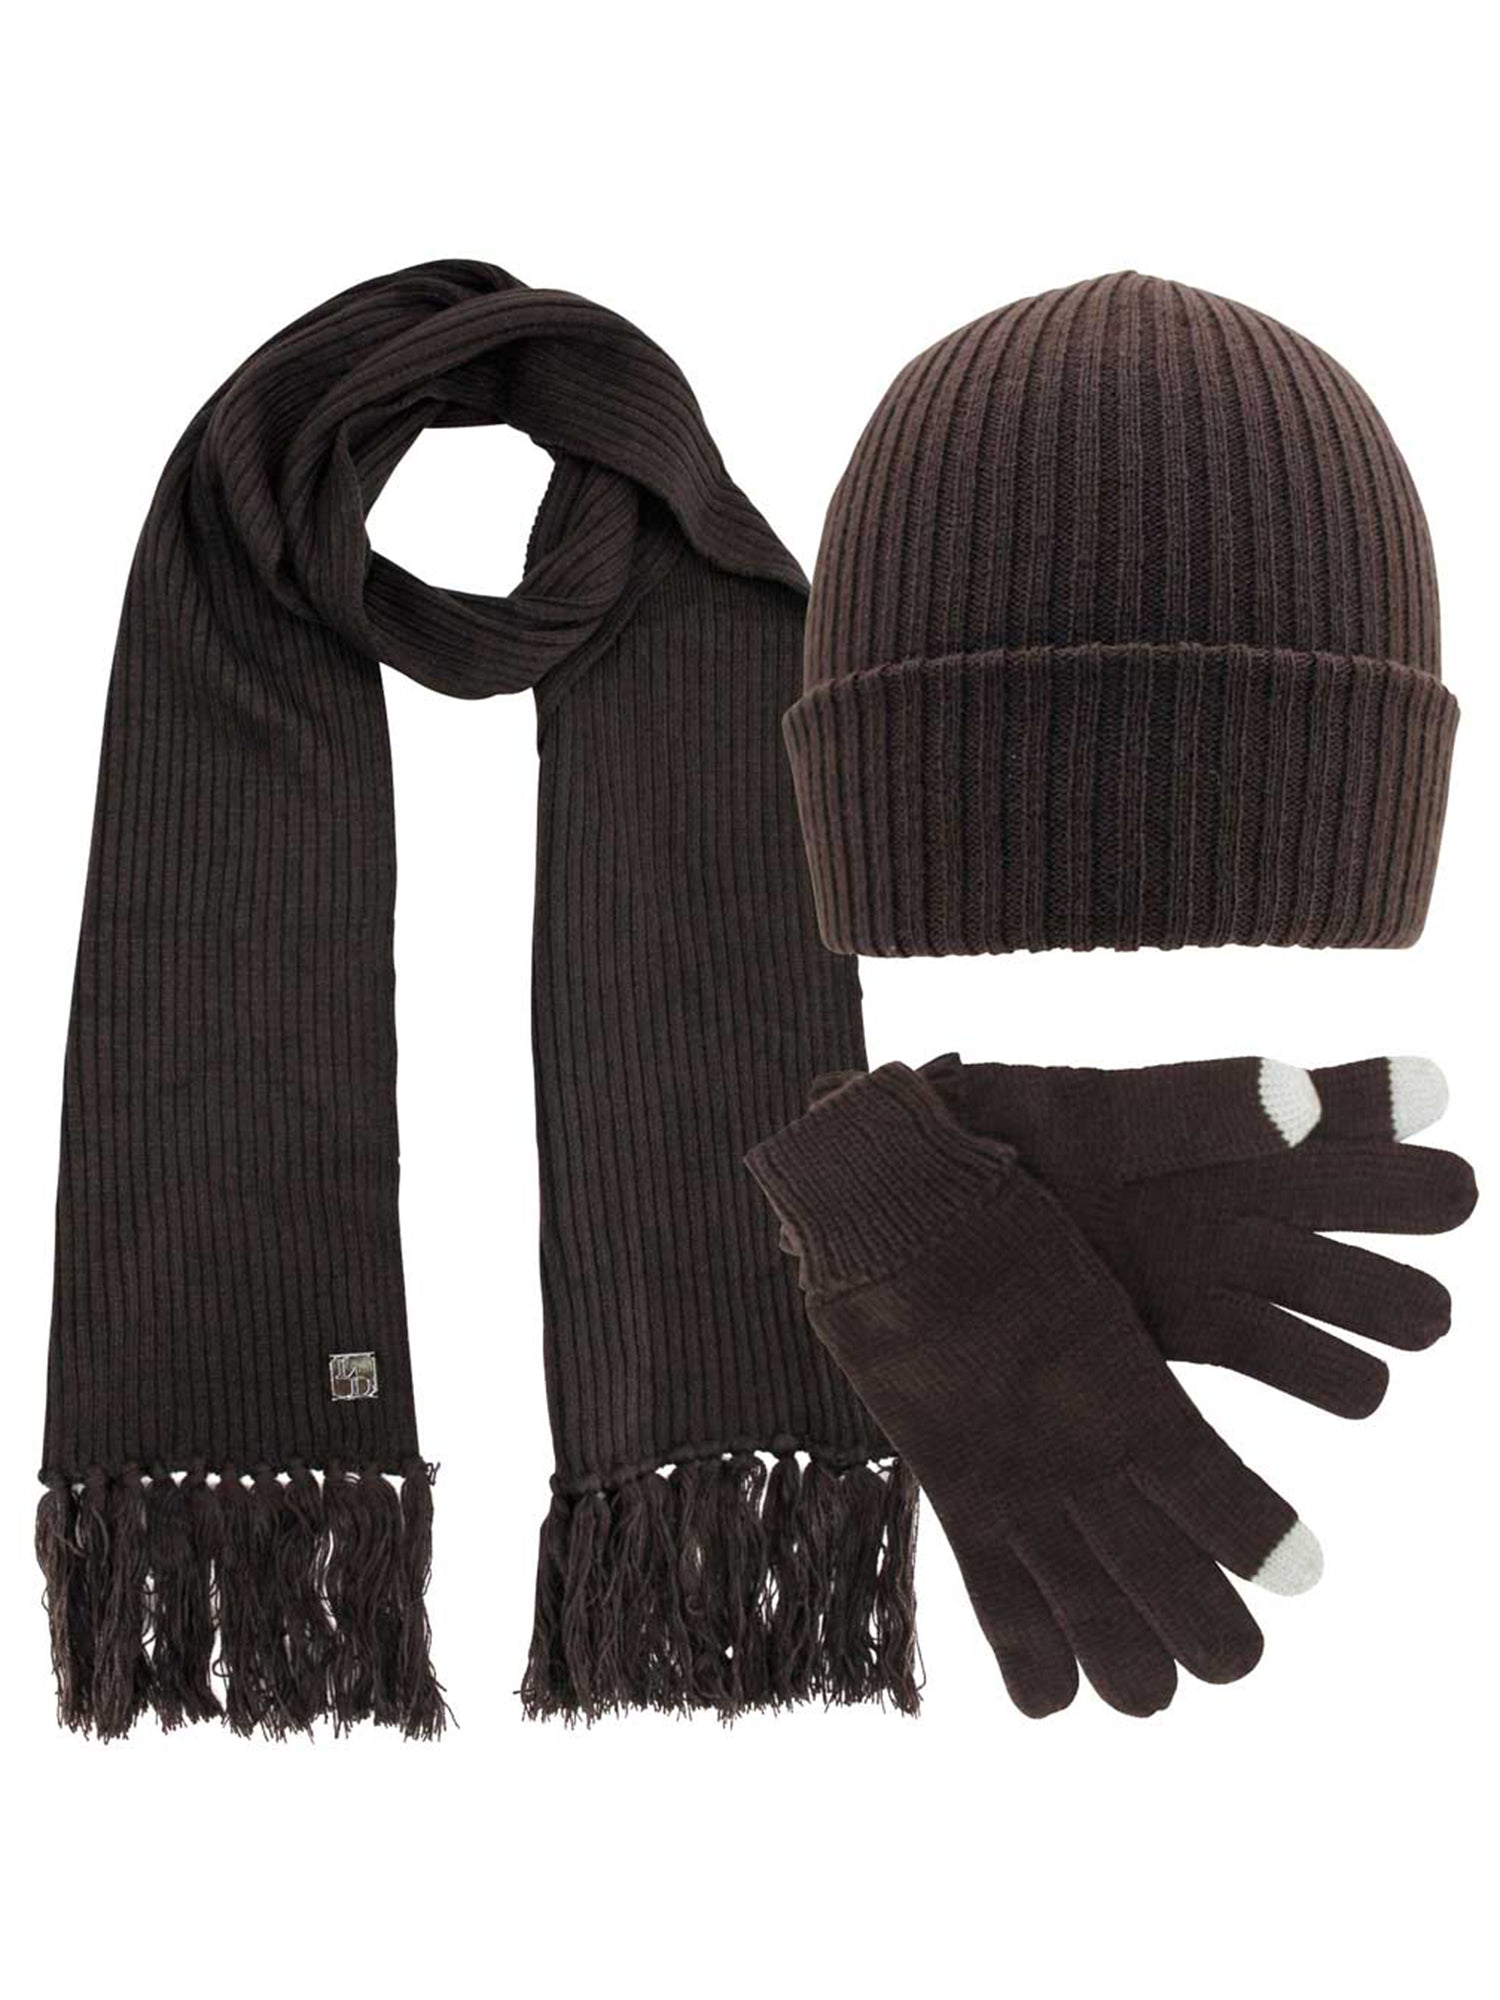 SA Company Mens Hats, Gloves & Scarves in Men's Accessories